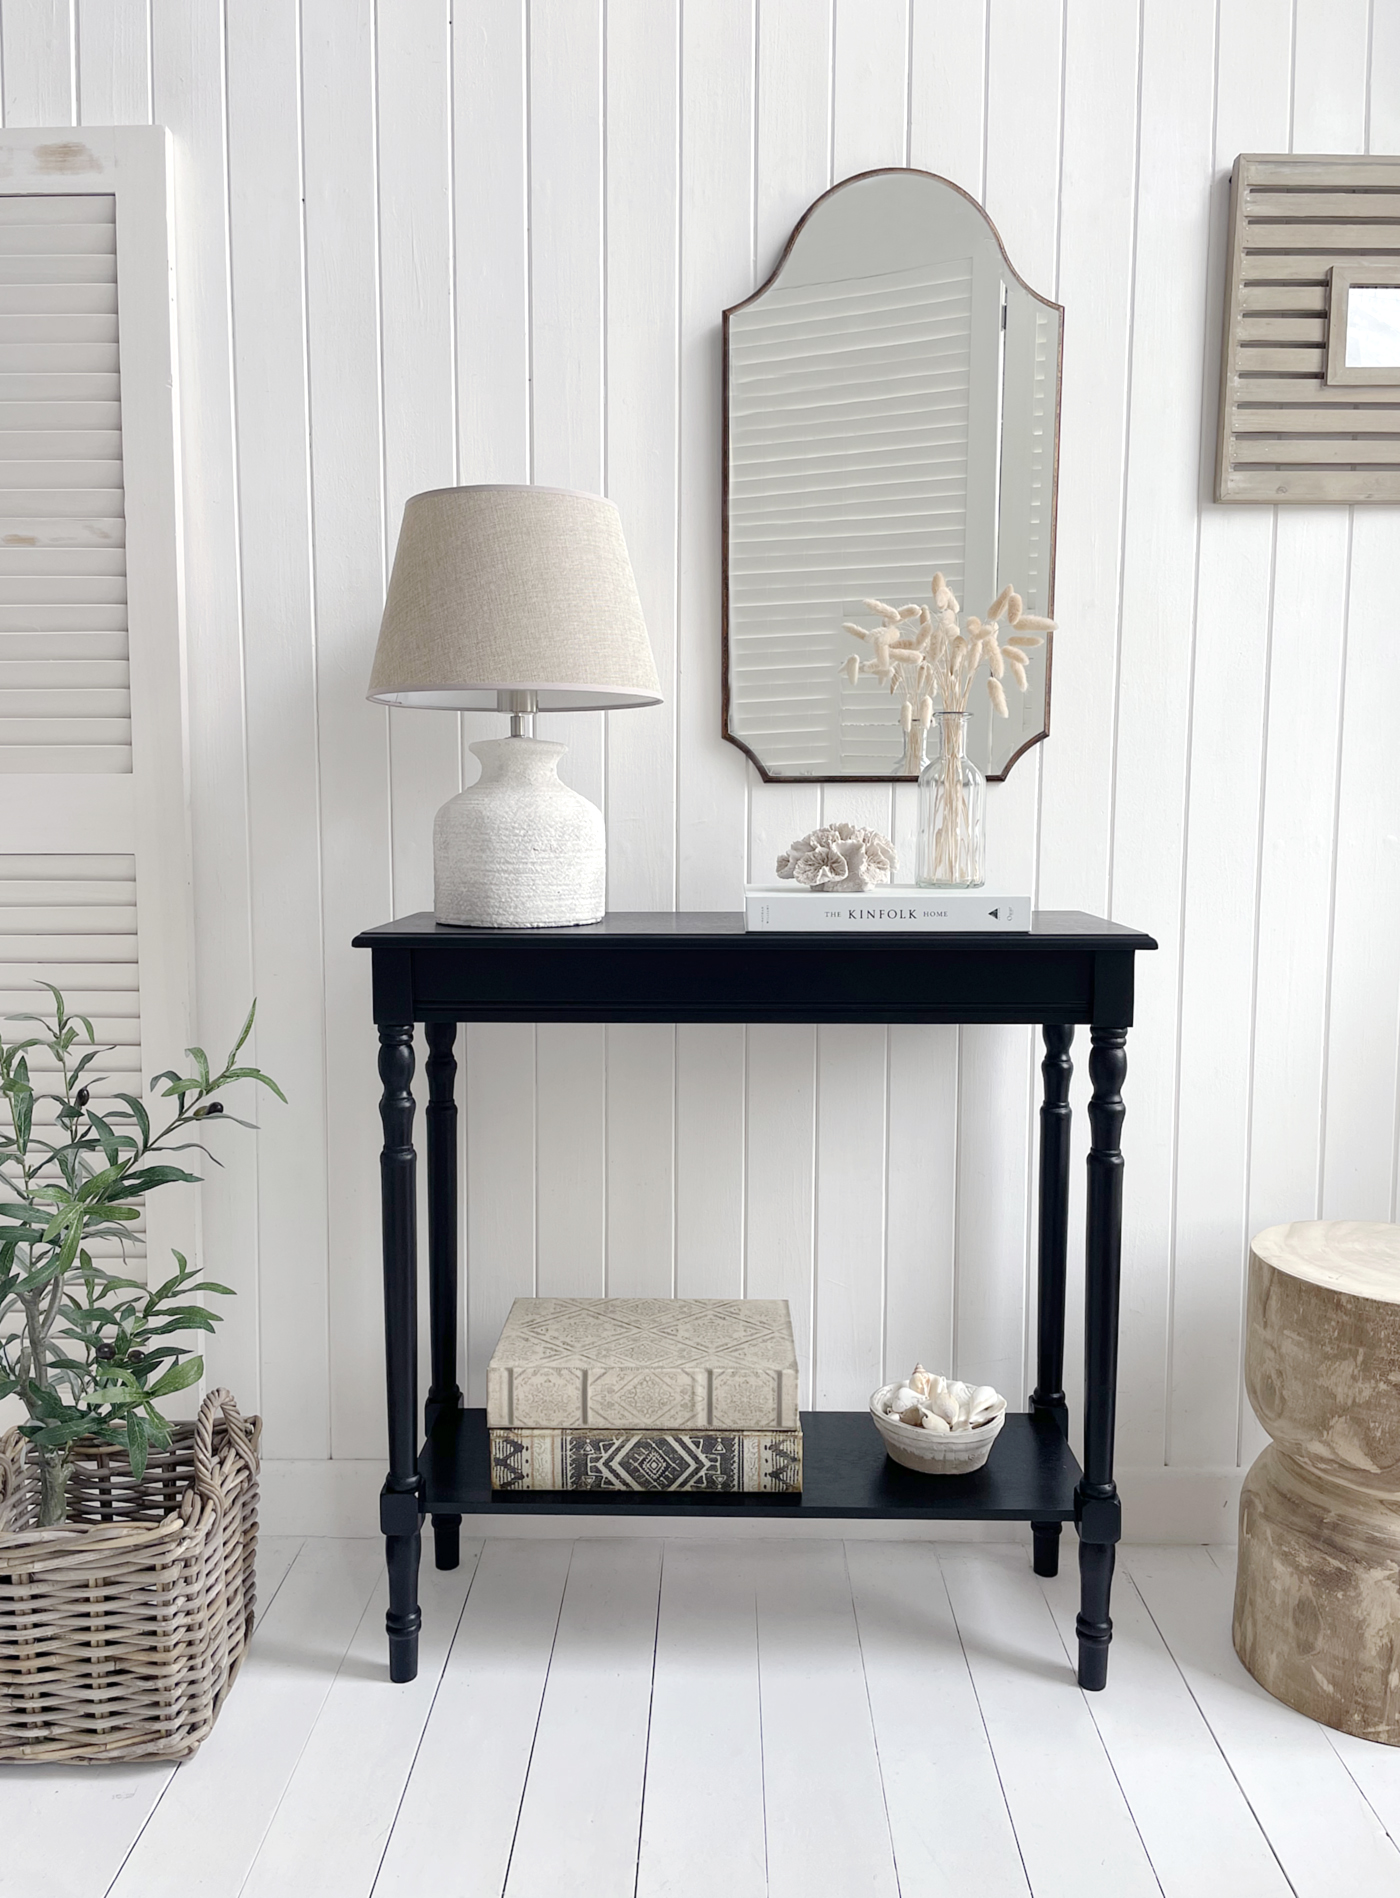 Ashby black furniture. A black console table with a shelf. A small Console Table for Coastal, Beach House Modern Farmhouse and Country Homes and Interiors, perfect for hallways, living rooms and bedroom furniture